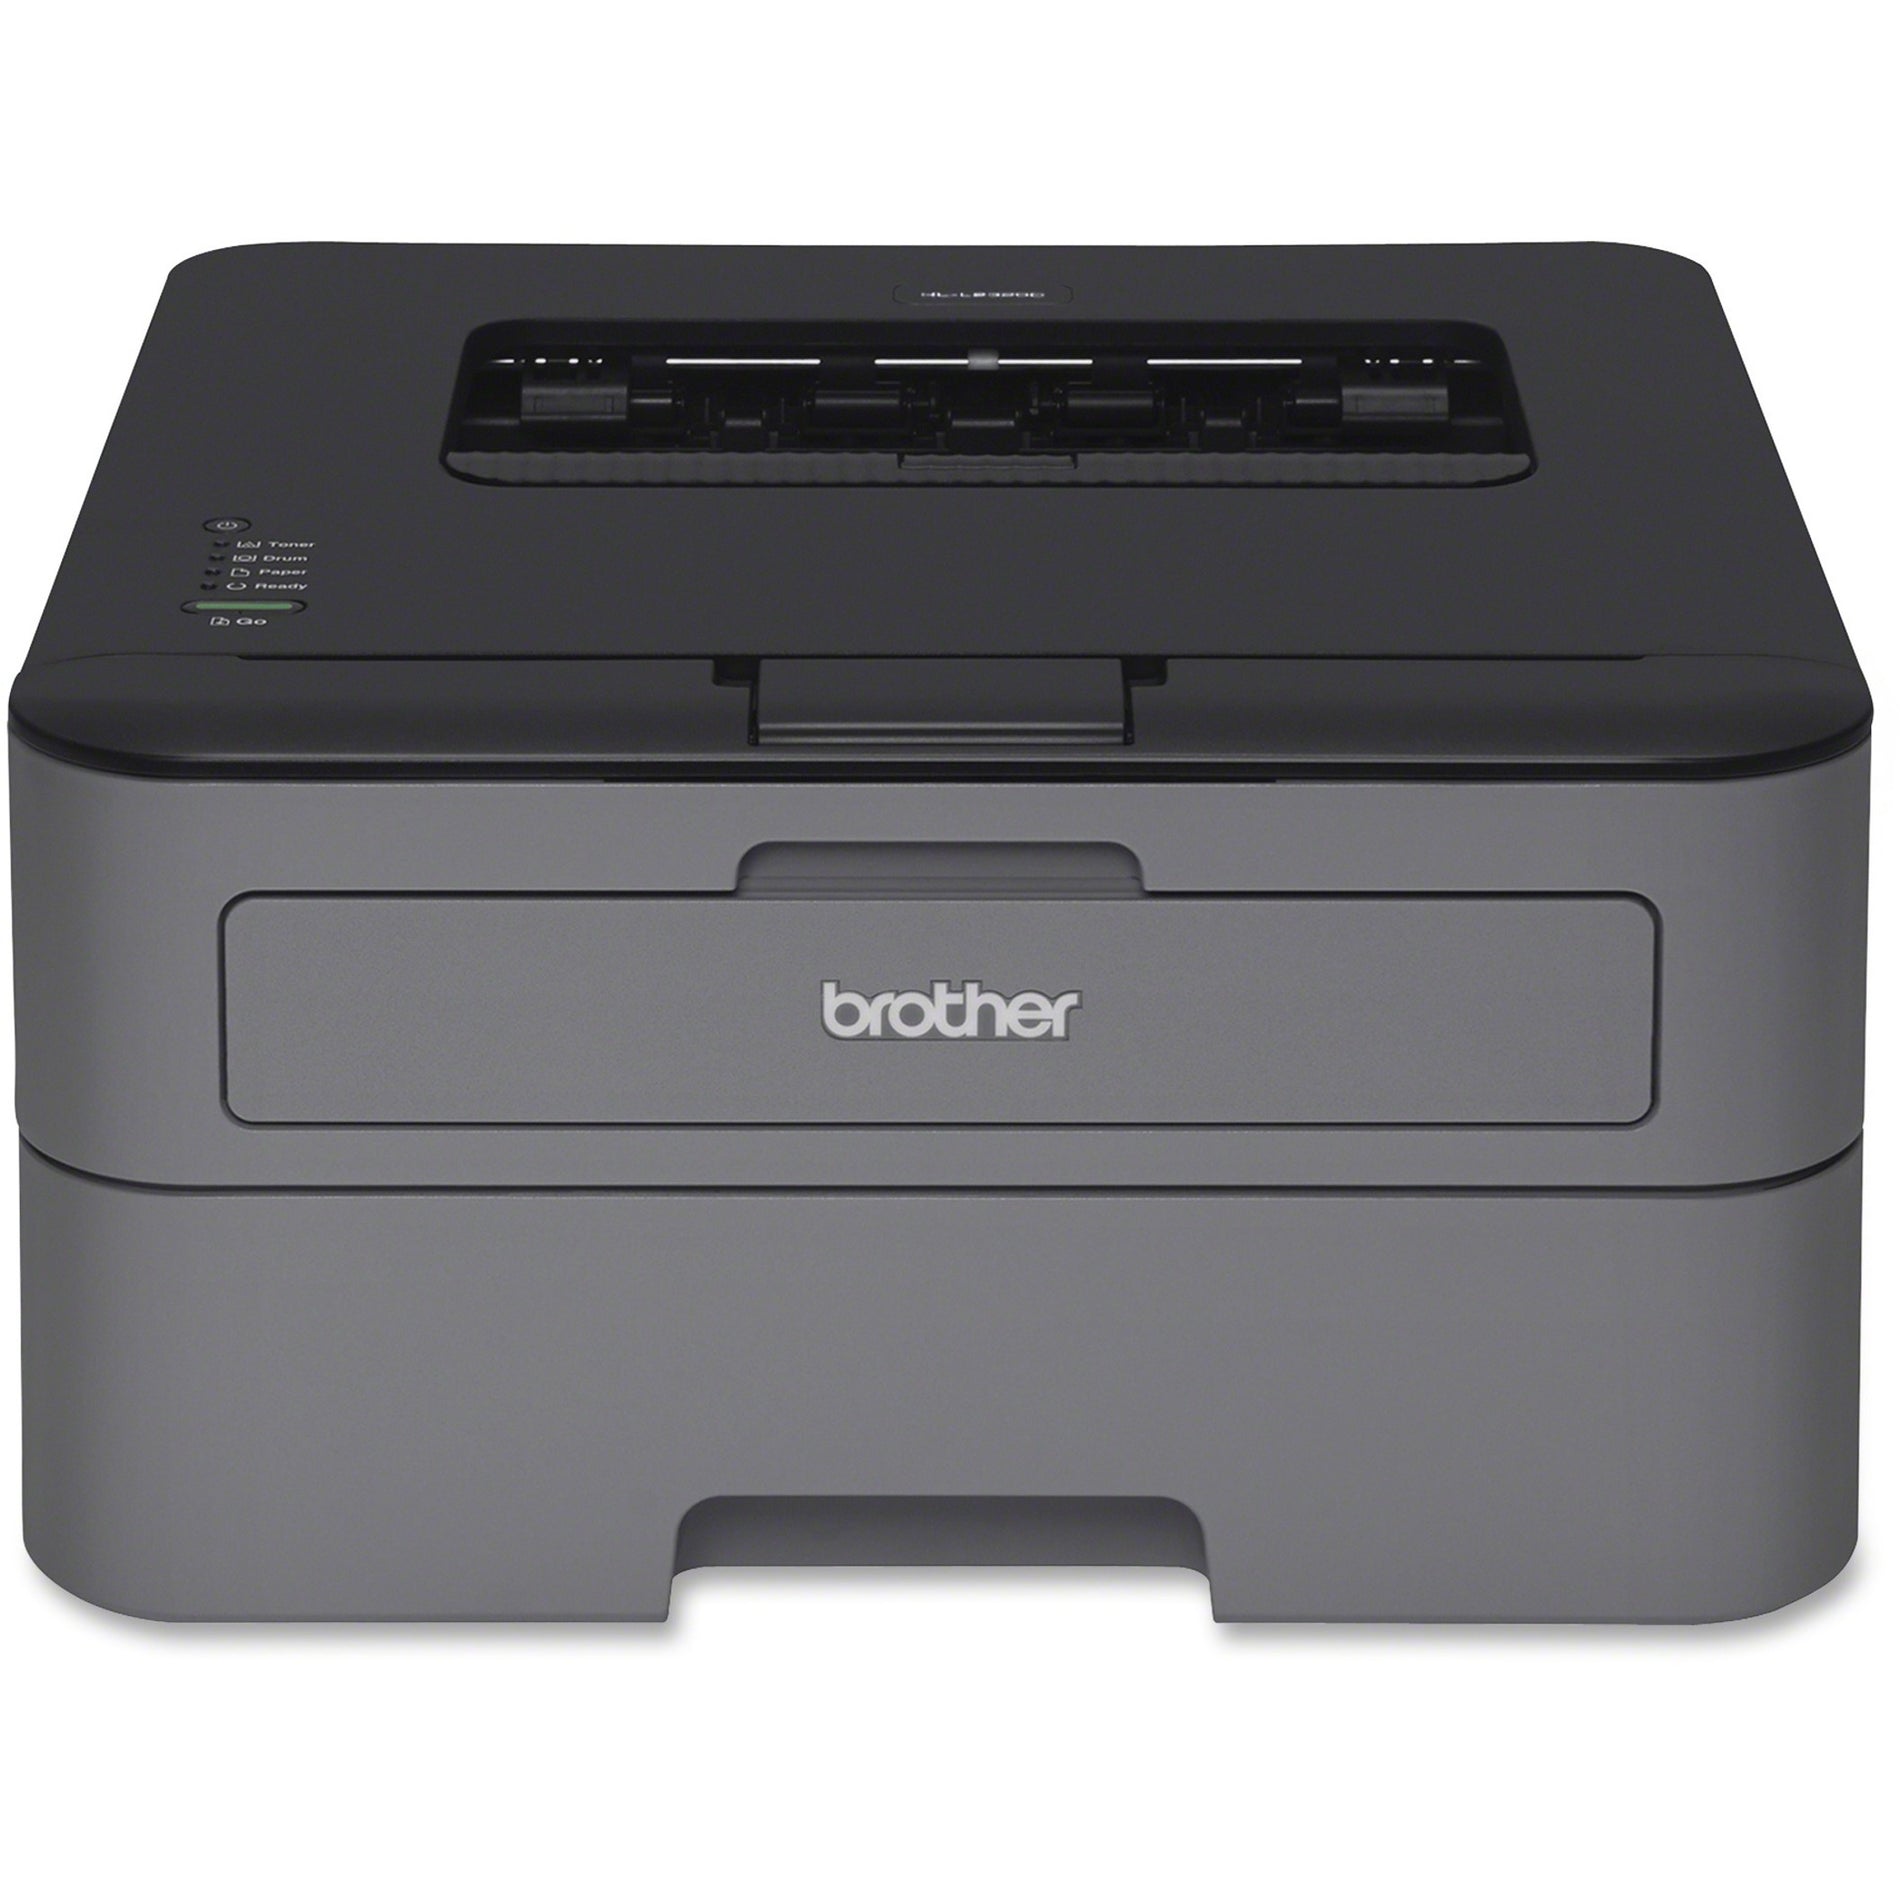 Brother HLL2320D HL-L2320D Compact, Personal Laser Printer with Duplex - Monochrome, 30 ppm, 2400 x 600 dpi